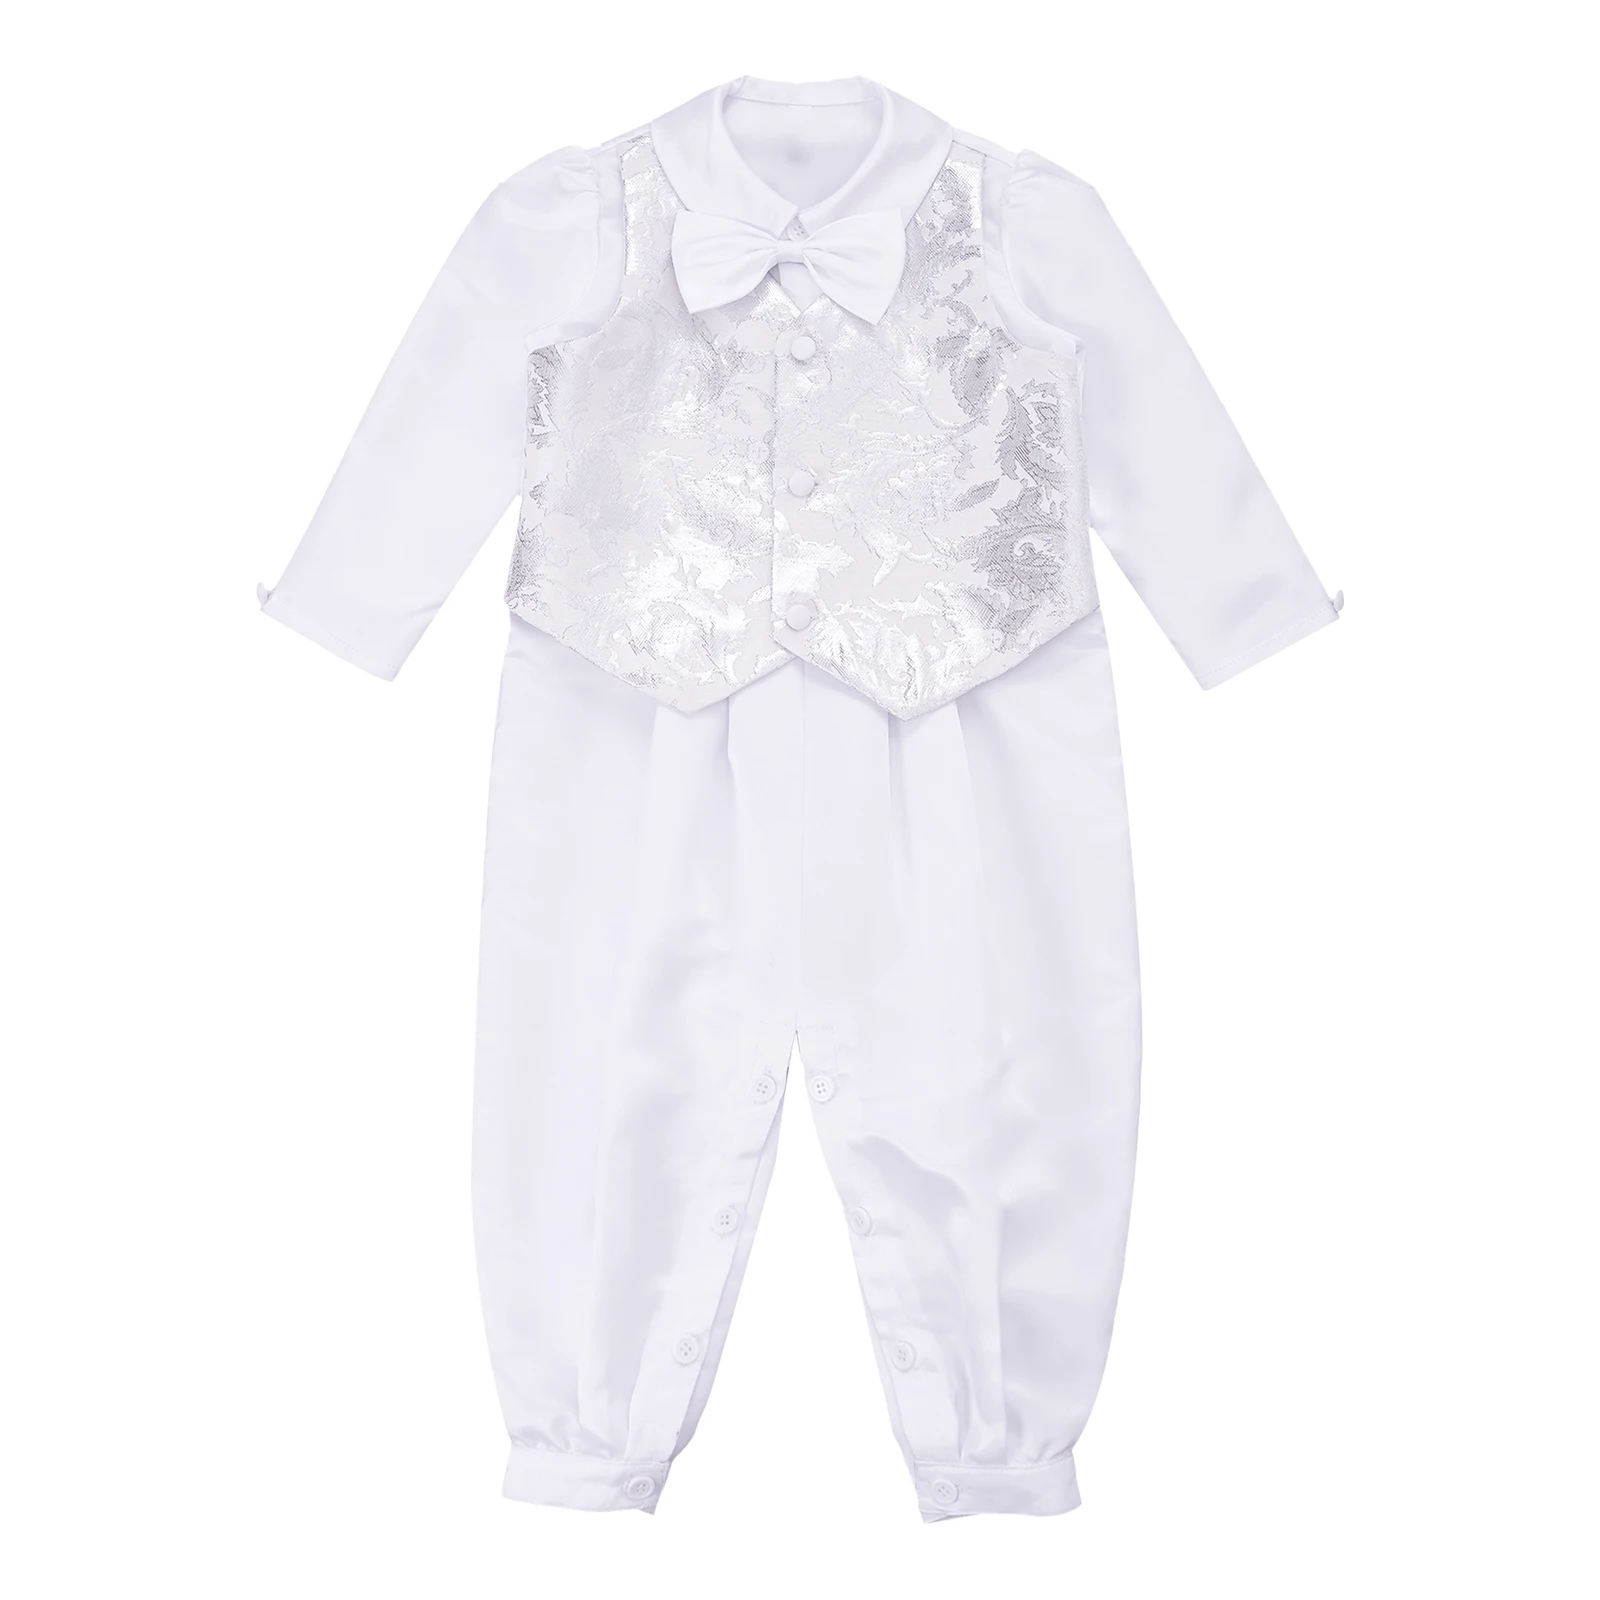 Baby Boy Christening Rompers Infant Boy Formal Wedding Birthday Party Suit Bow Tie Gentleman Suit Baptism Jumpsuit Clothes